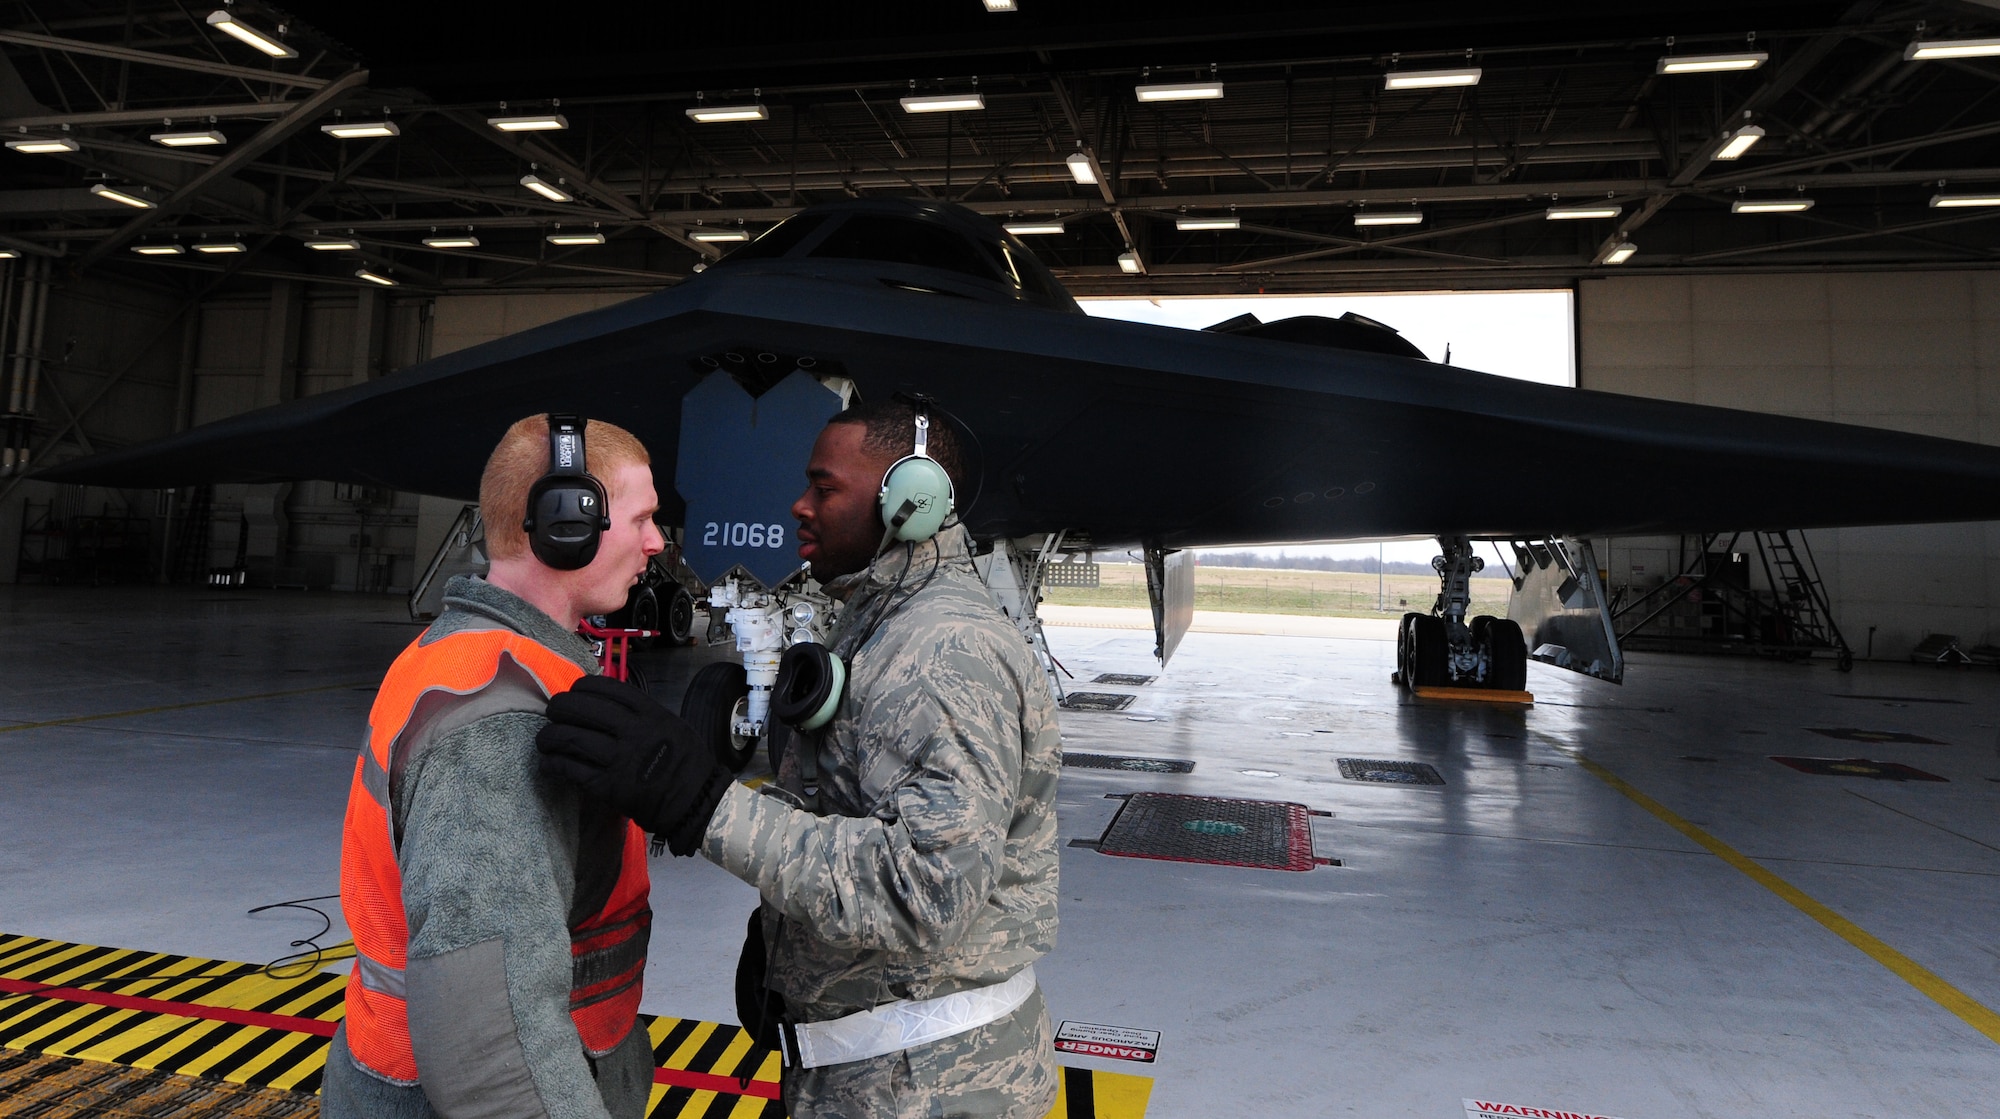 Airmen 1st Class James Fulton and Steven McCray and James Fulton, 13th Aircraft Maintenance Unit crew chiefs, discuss launch operations during a pre-flight inspection at Whiteman Air Force Base, April 5, 2013. Fulton and McCray are two of more than 160 crew chiefs that are responsible for ensuring each B-2 assigned to Whiteman Air Force Base is mission-ready. (U.S. Air Force photo by Staff Sgt. Nick Wilson/Released)